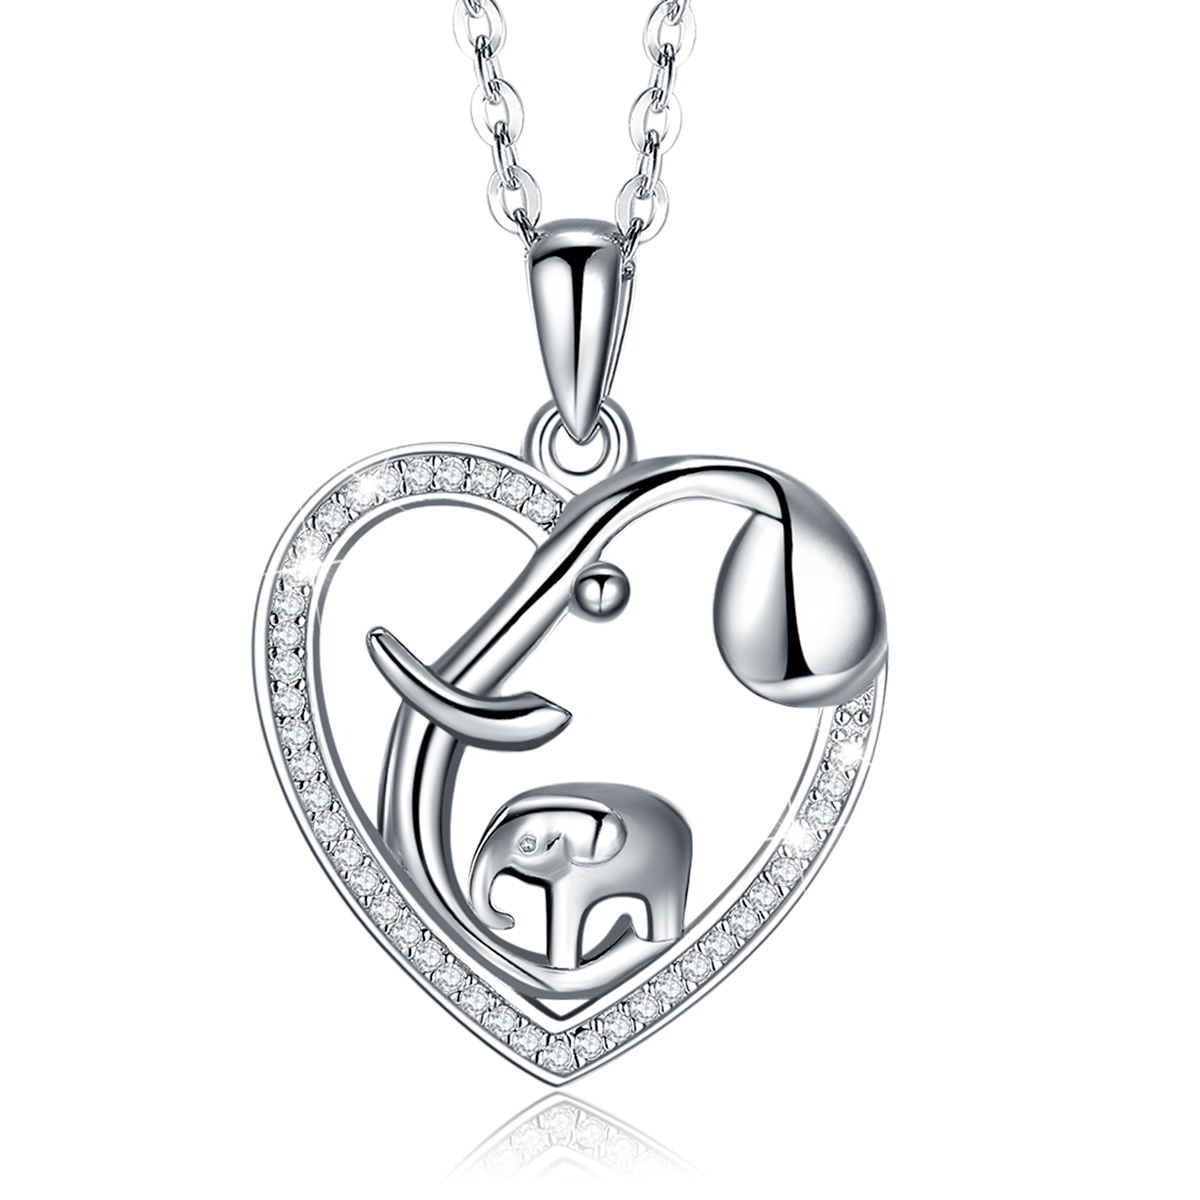 Merryshine 925 Sterling Silver Jewelry Good Lucky Mother and Son Elephant Necklace Pendant